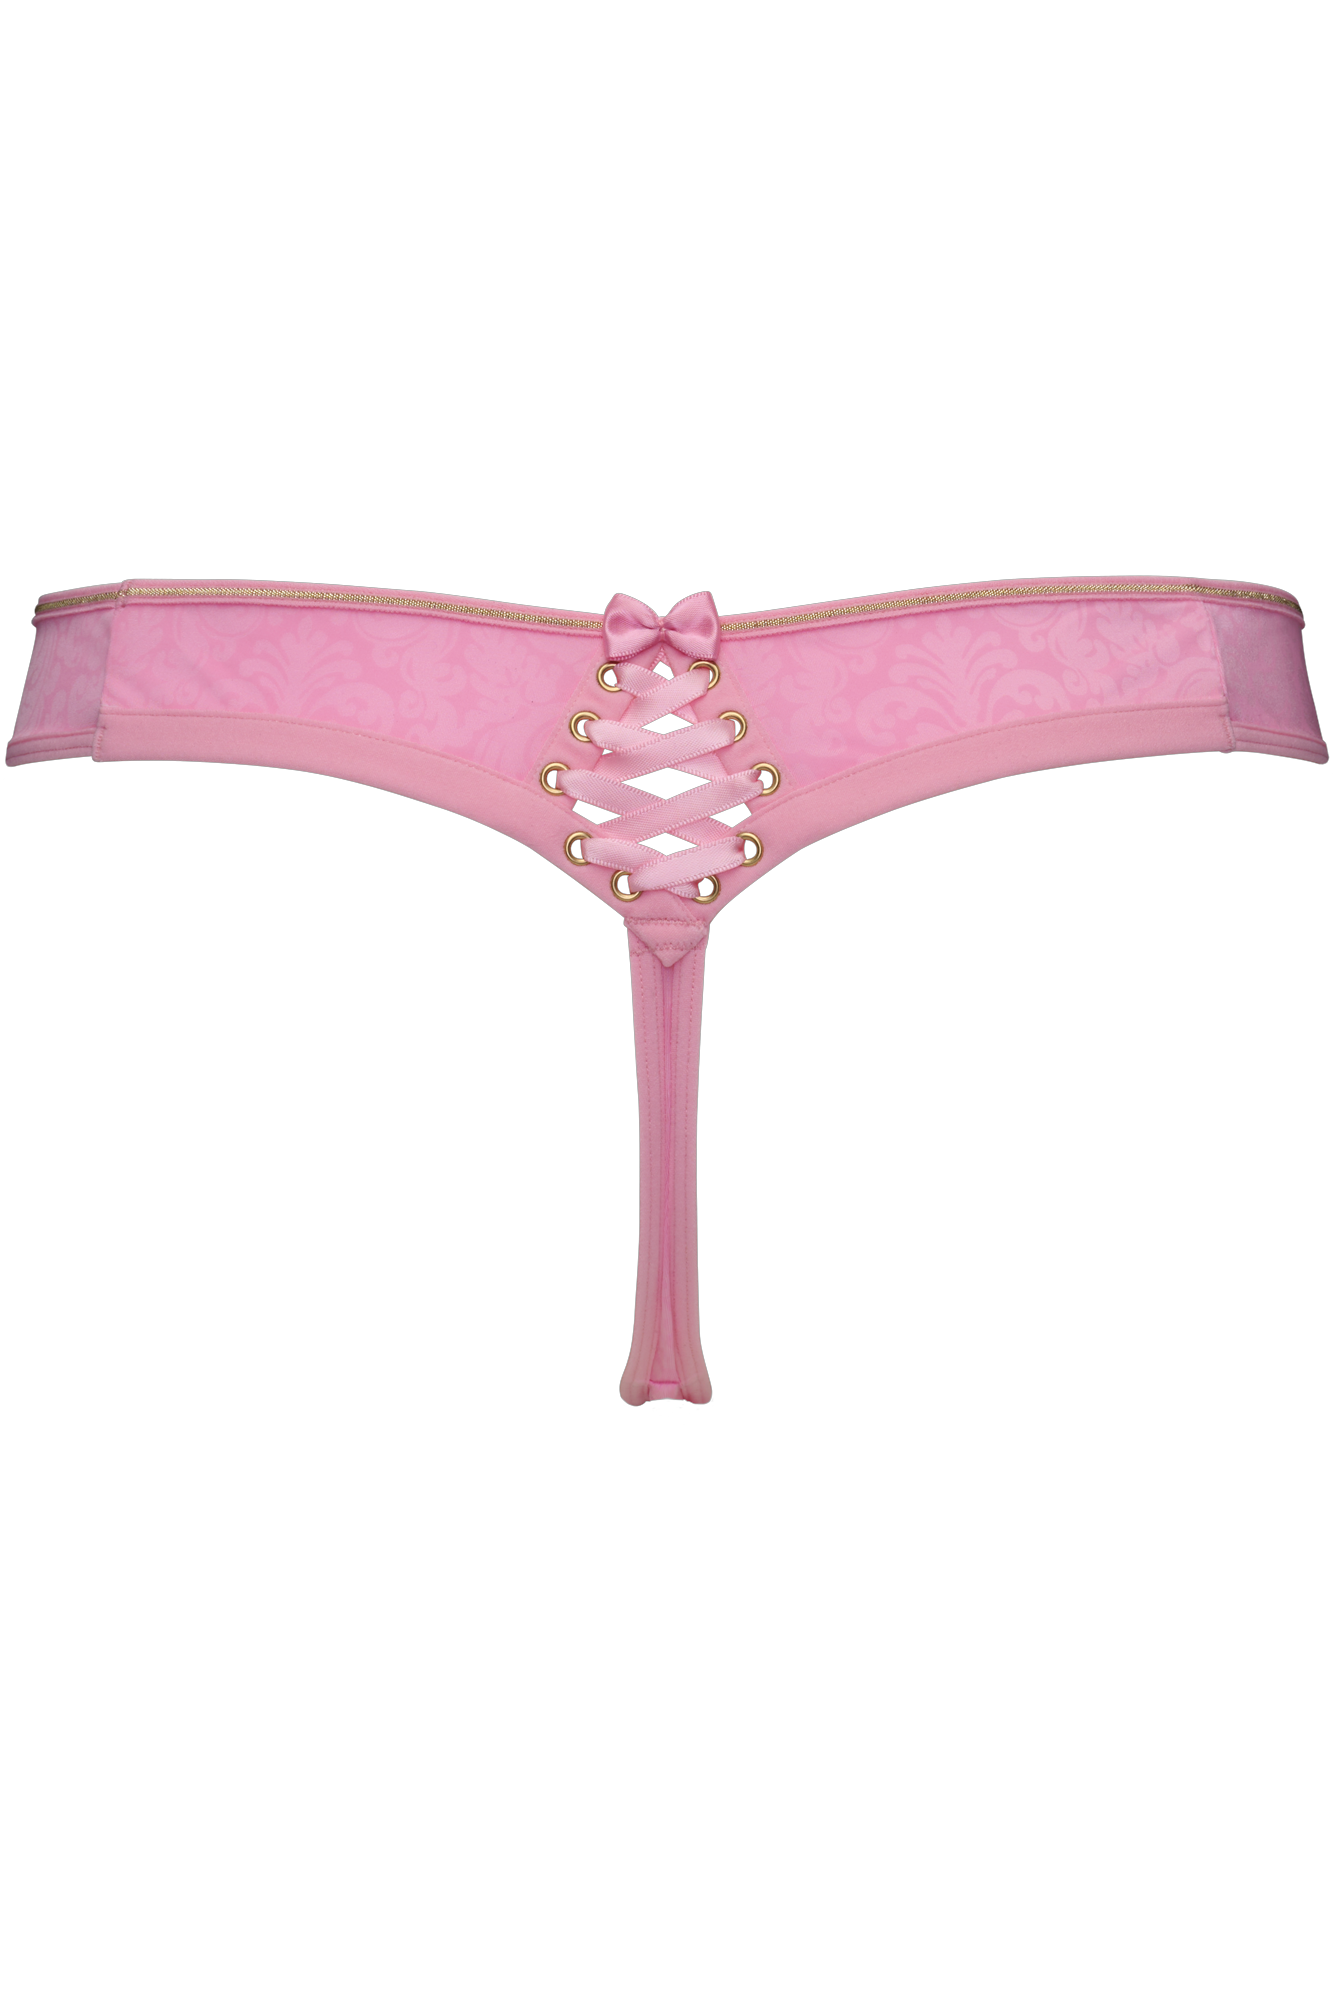 Marlies Dekkers rococo 4 cm string royal pink and gold